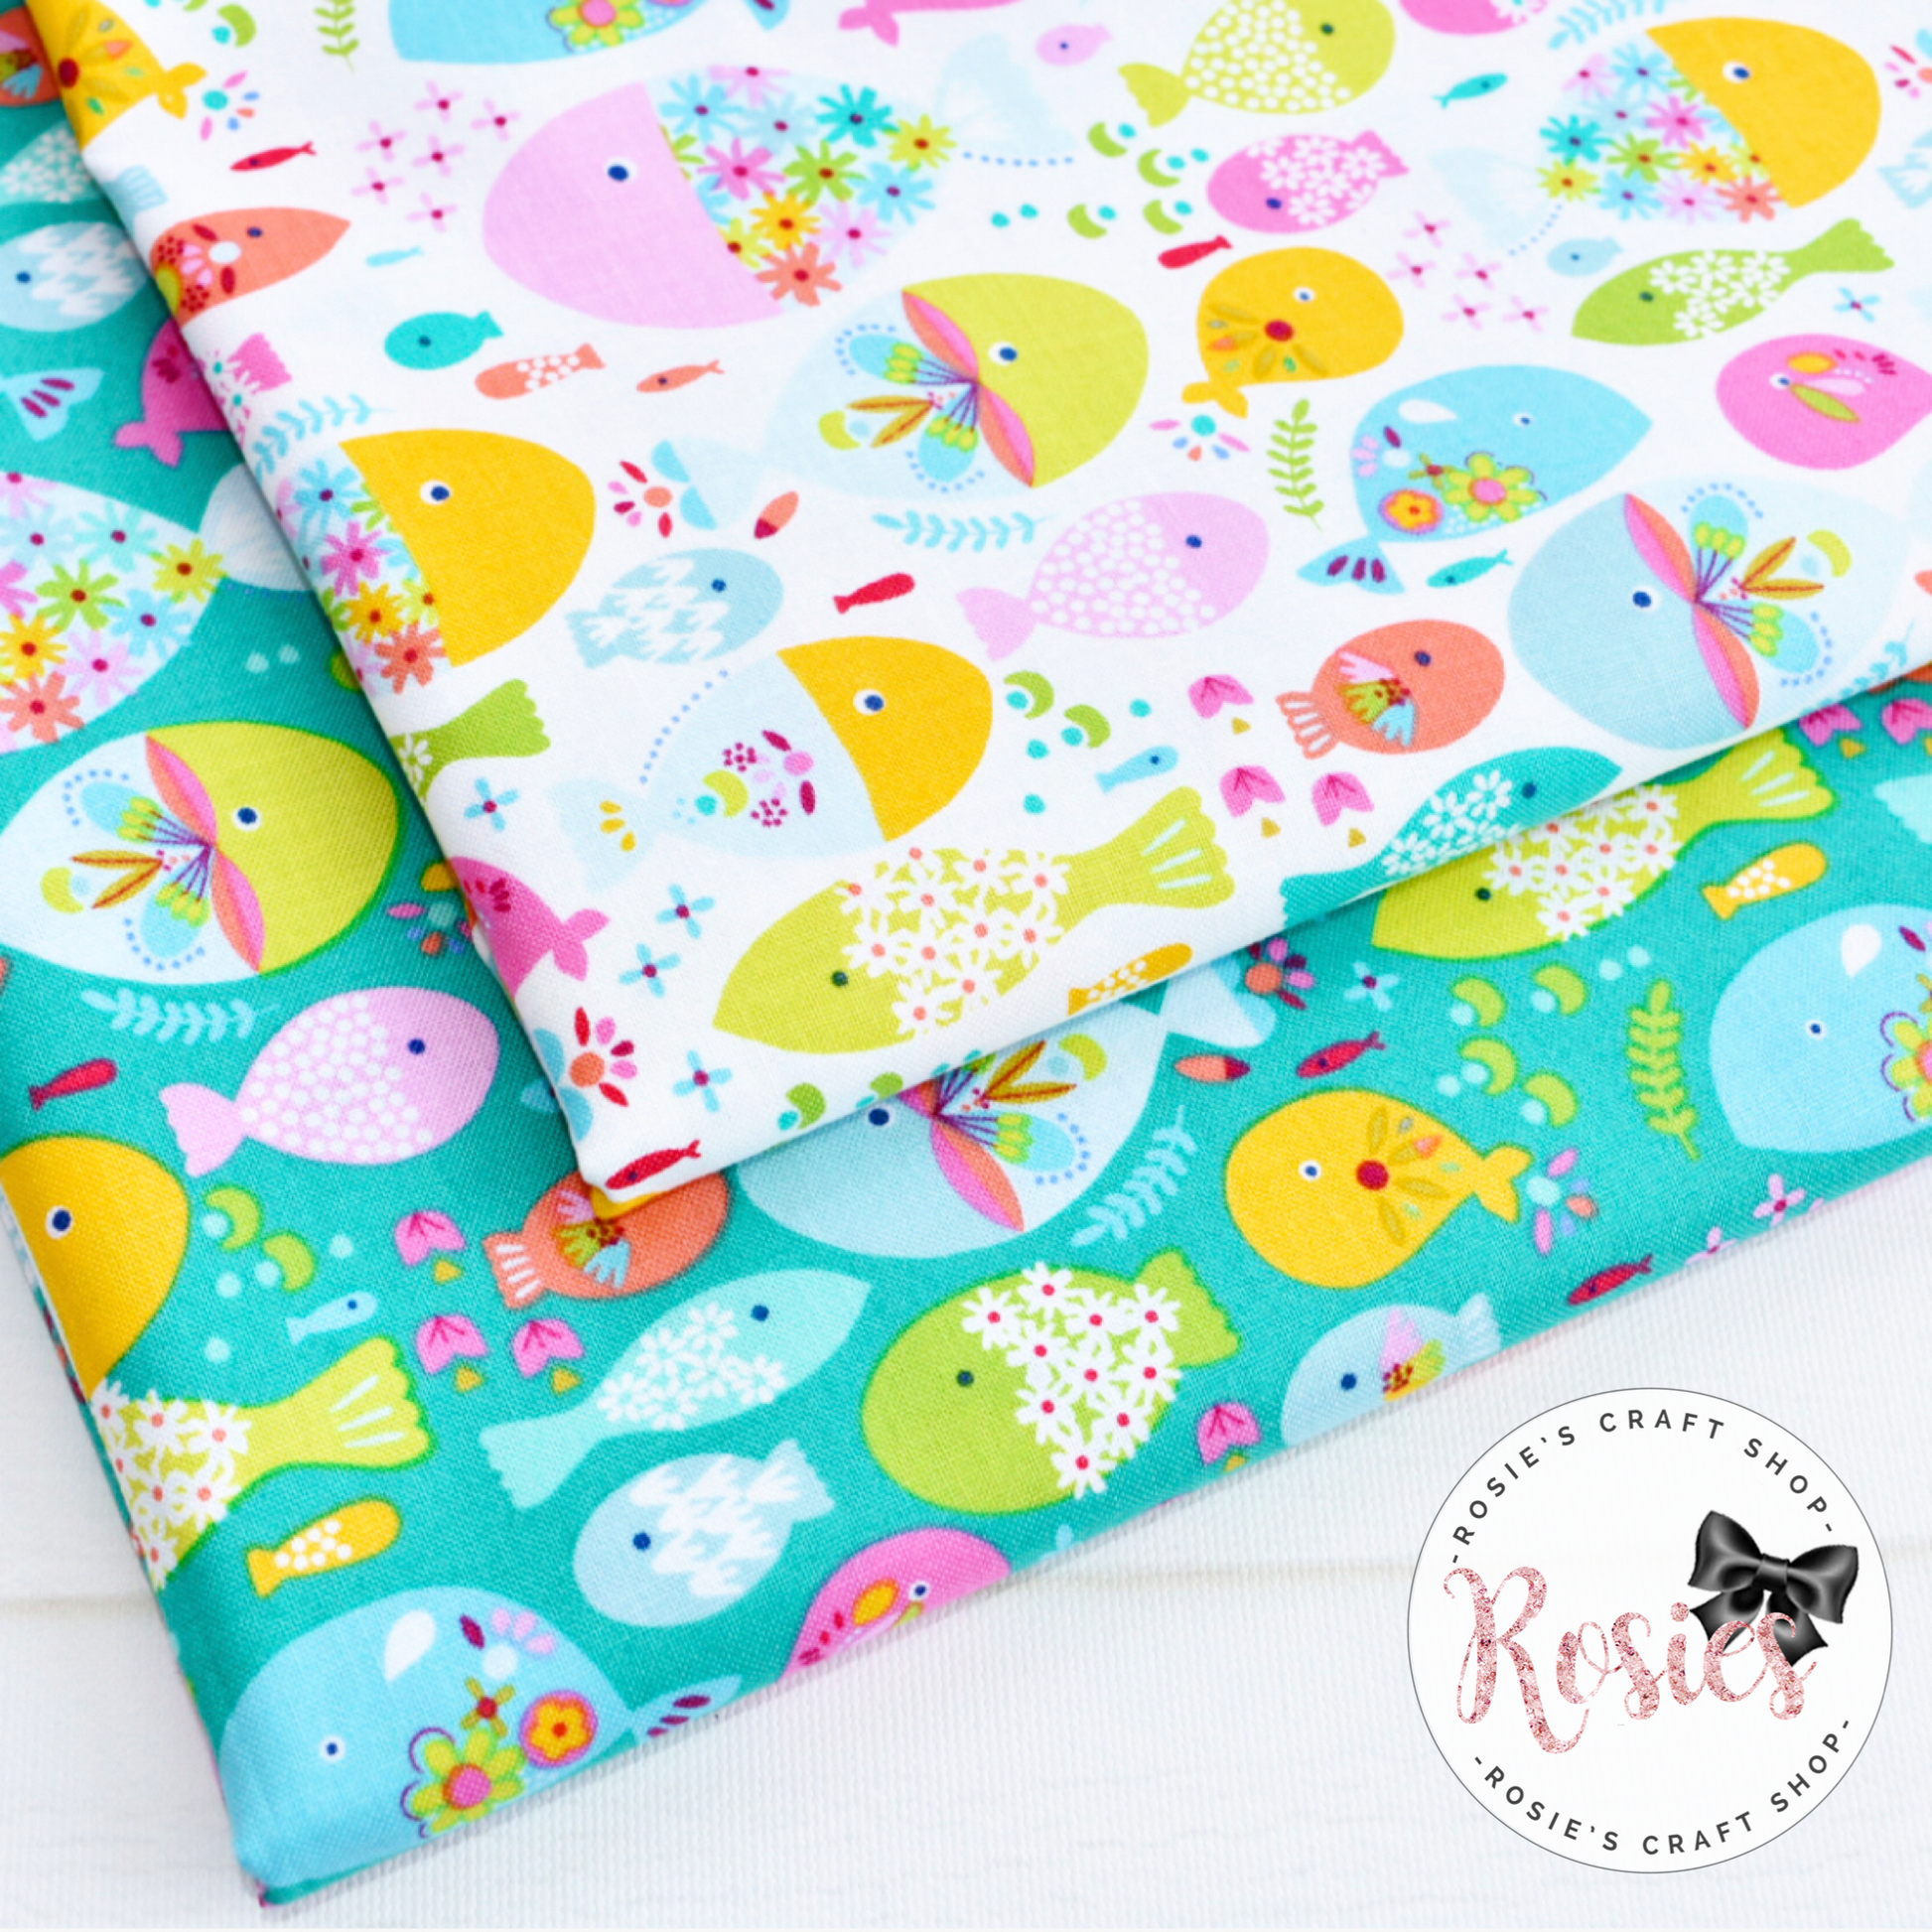 White Swimming With The Fishes - Go Fish By Blend Fabrics 100% Cotton Fabric - Rosie's Craft Shop Ltd